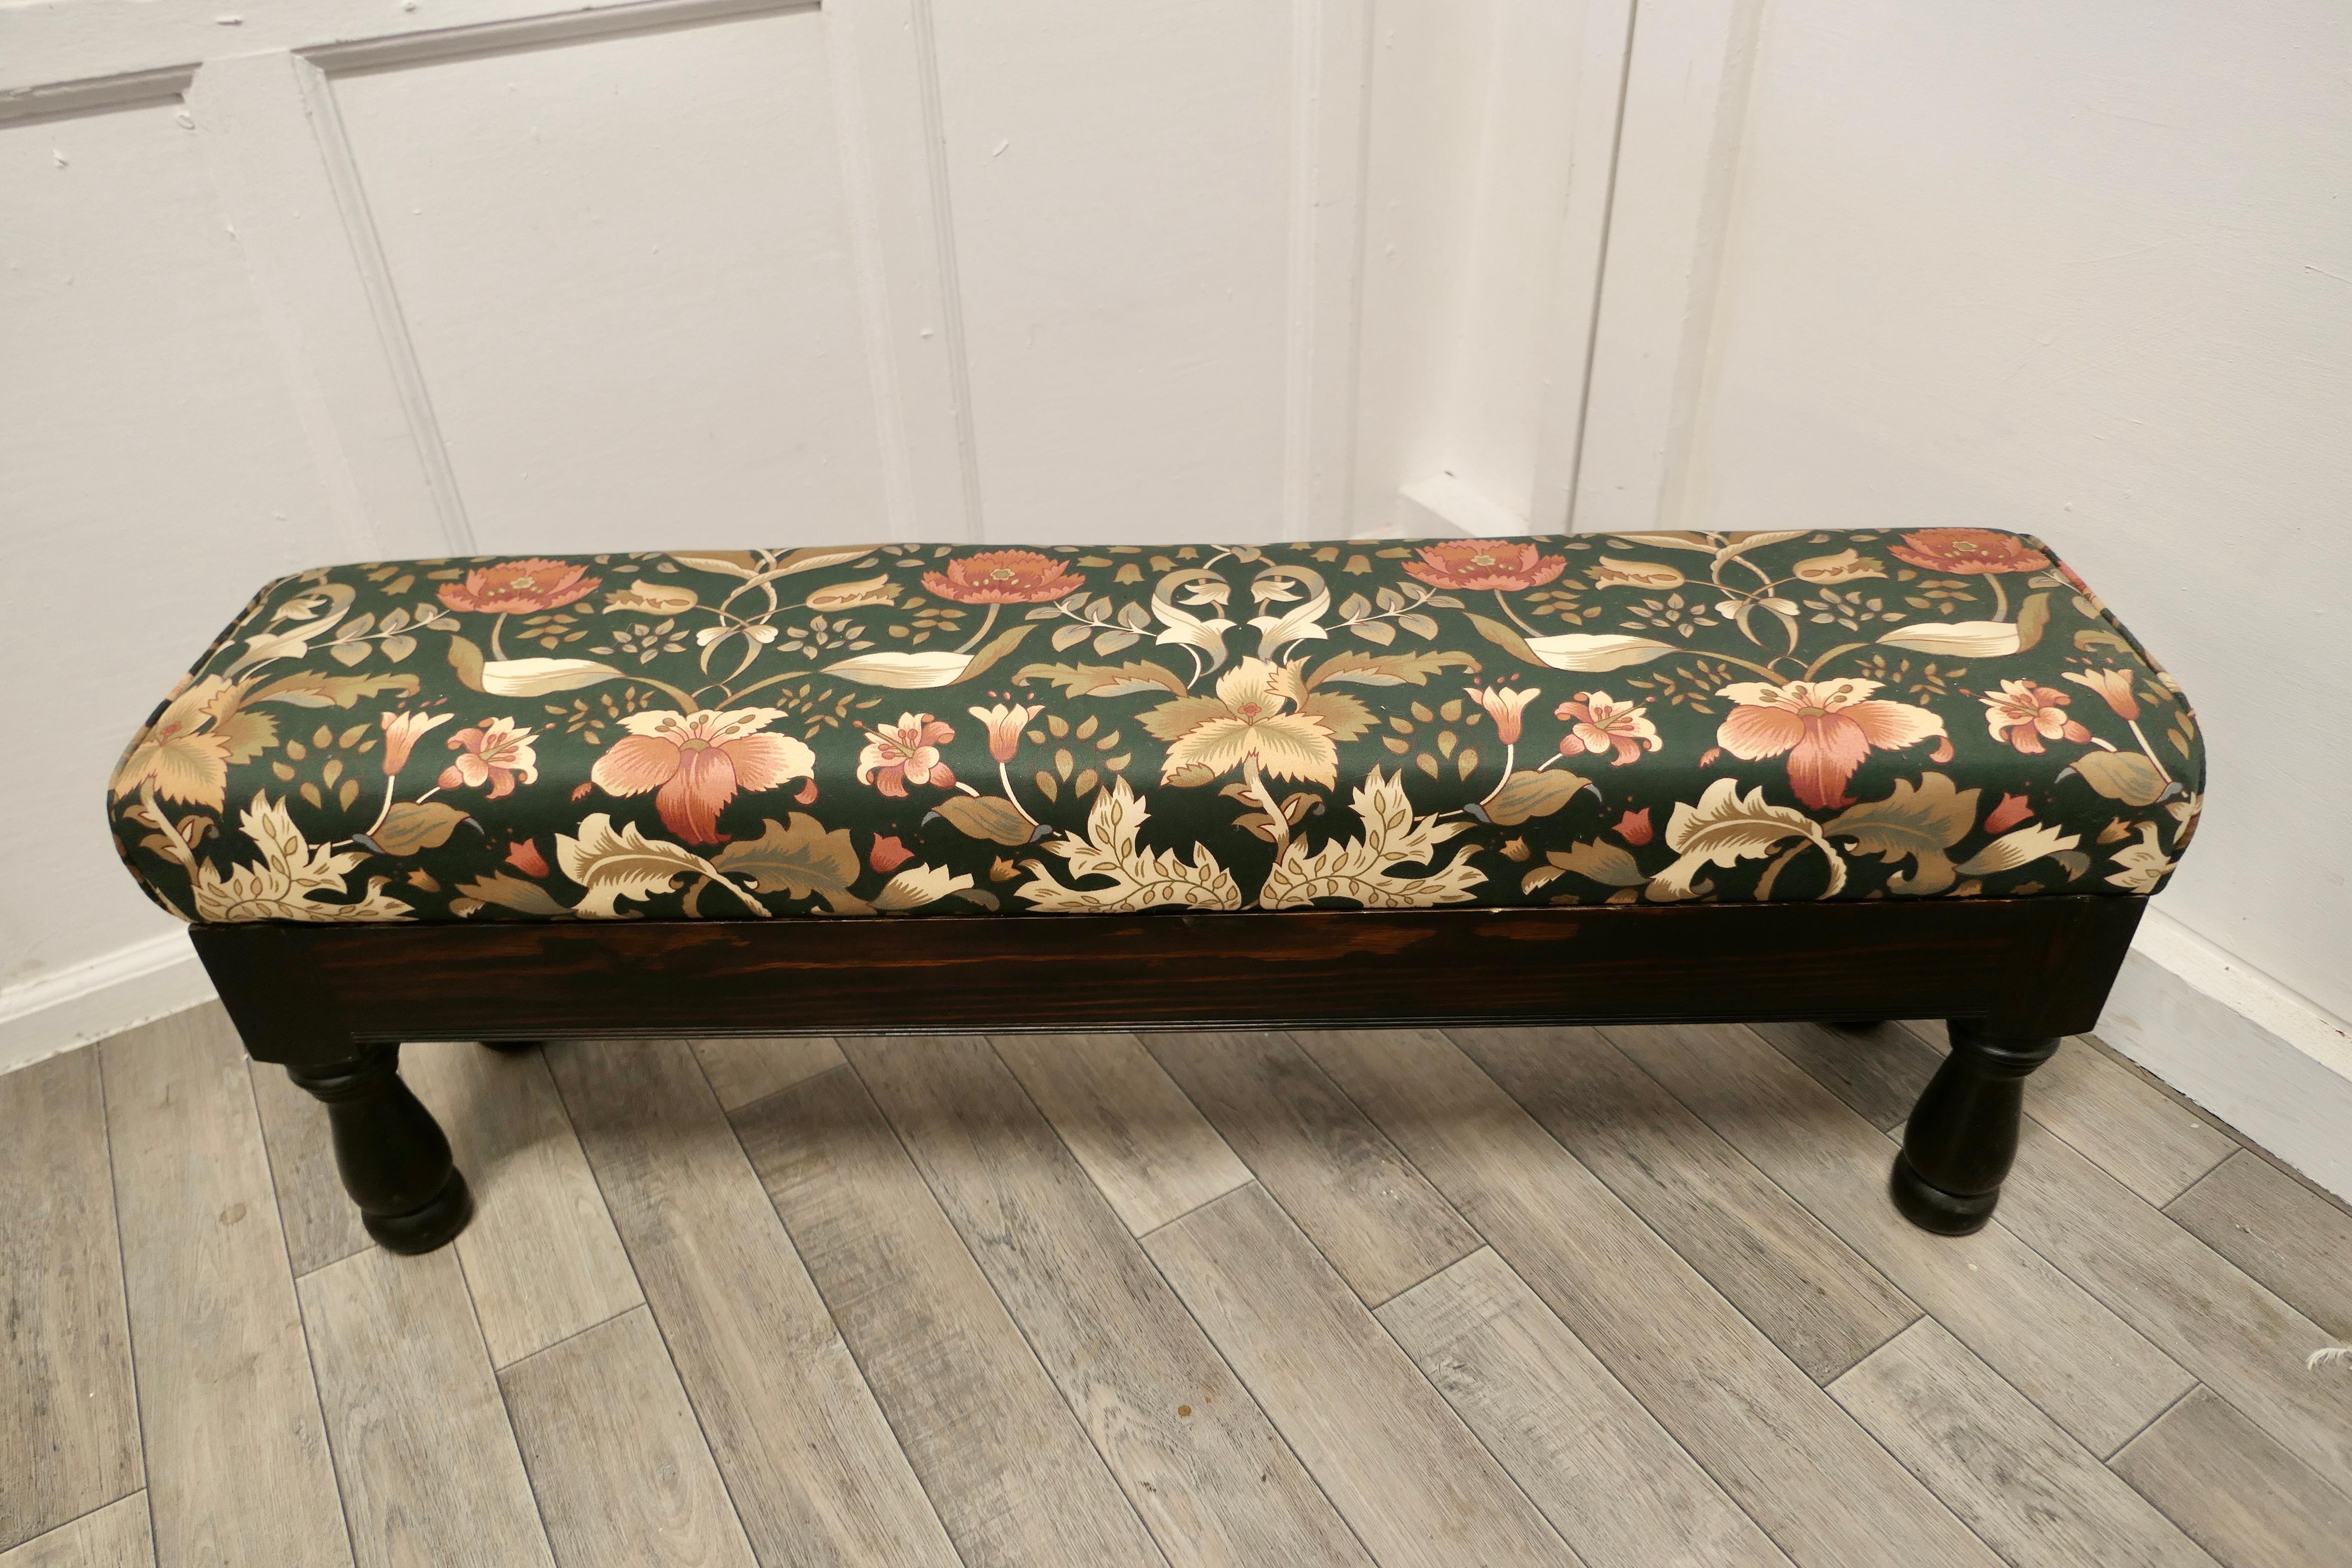 Long upholstered window seat stool.

A very attractive piece, the seat has new William Morris style floral print linen upholstery.
This would make a lovely window seat or boudoir stool and it is in good condition. 
The stool is 45” long x 11”